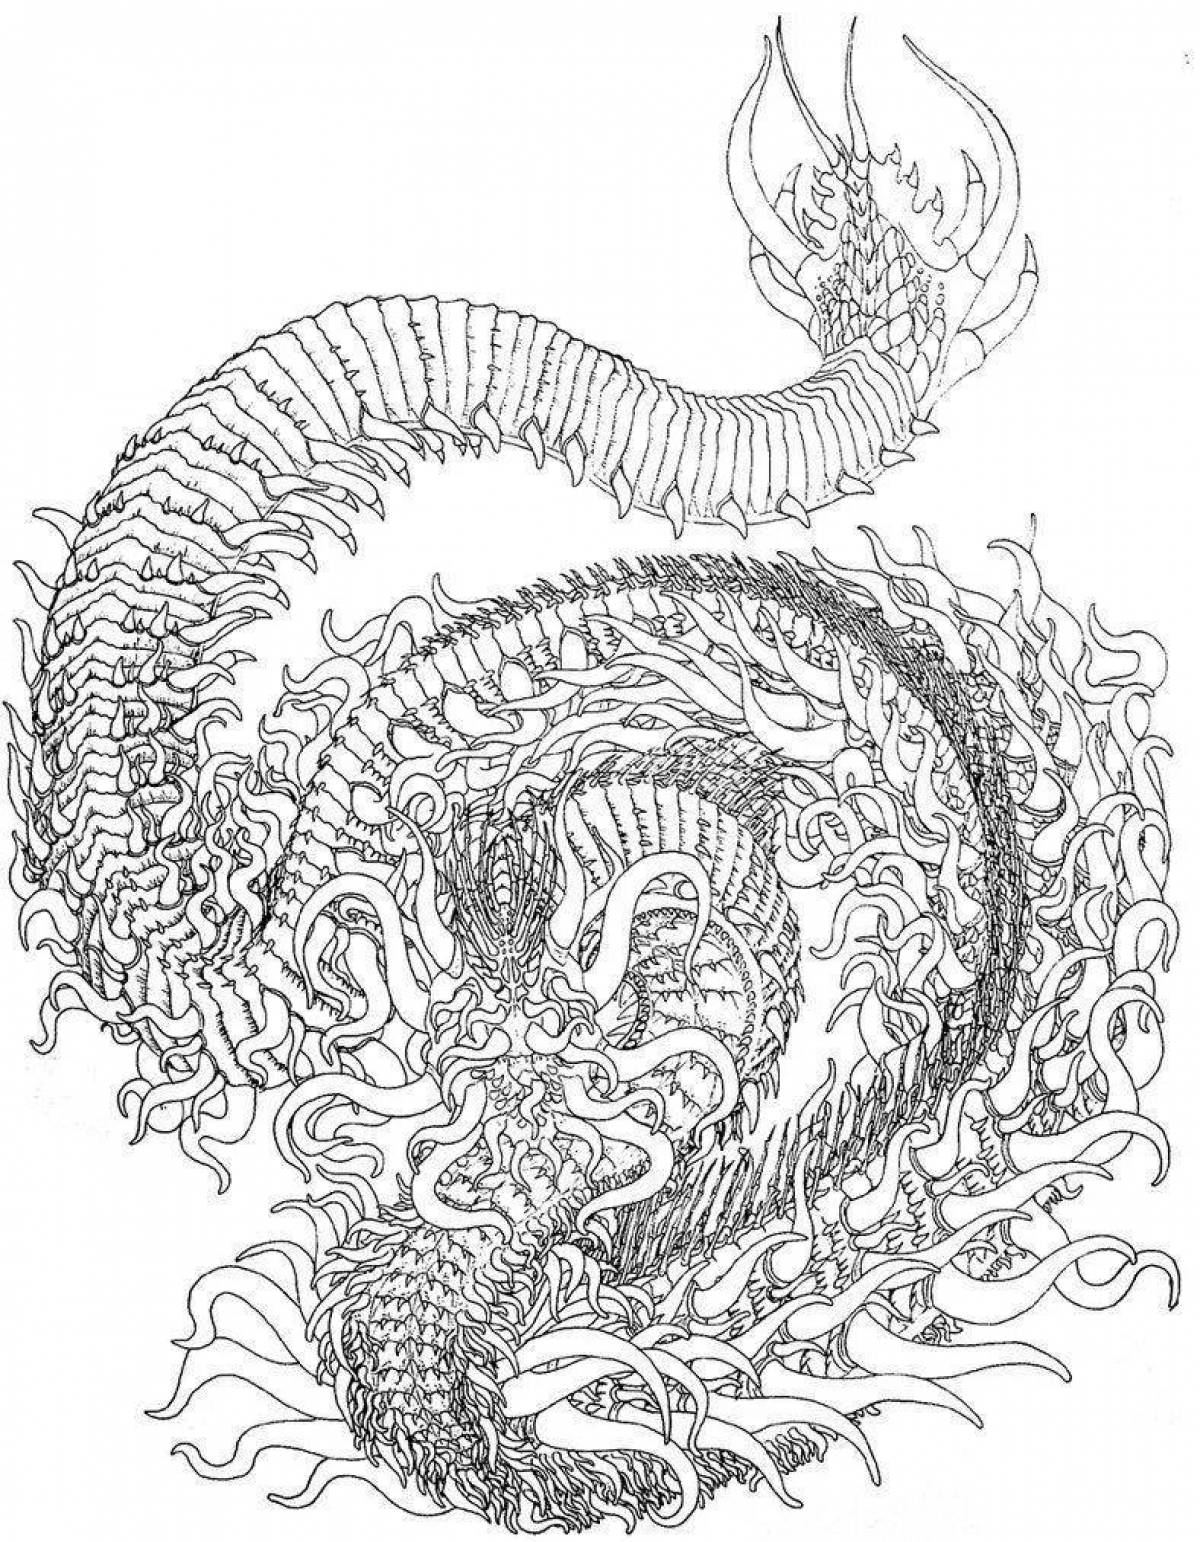 Flawless Water Dragon coloring page